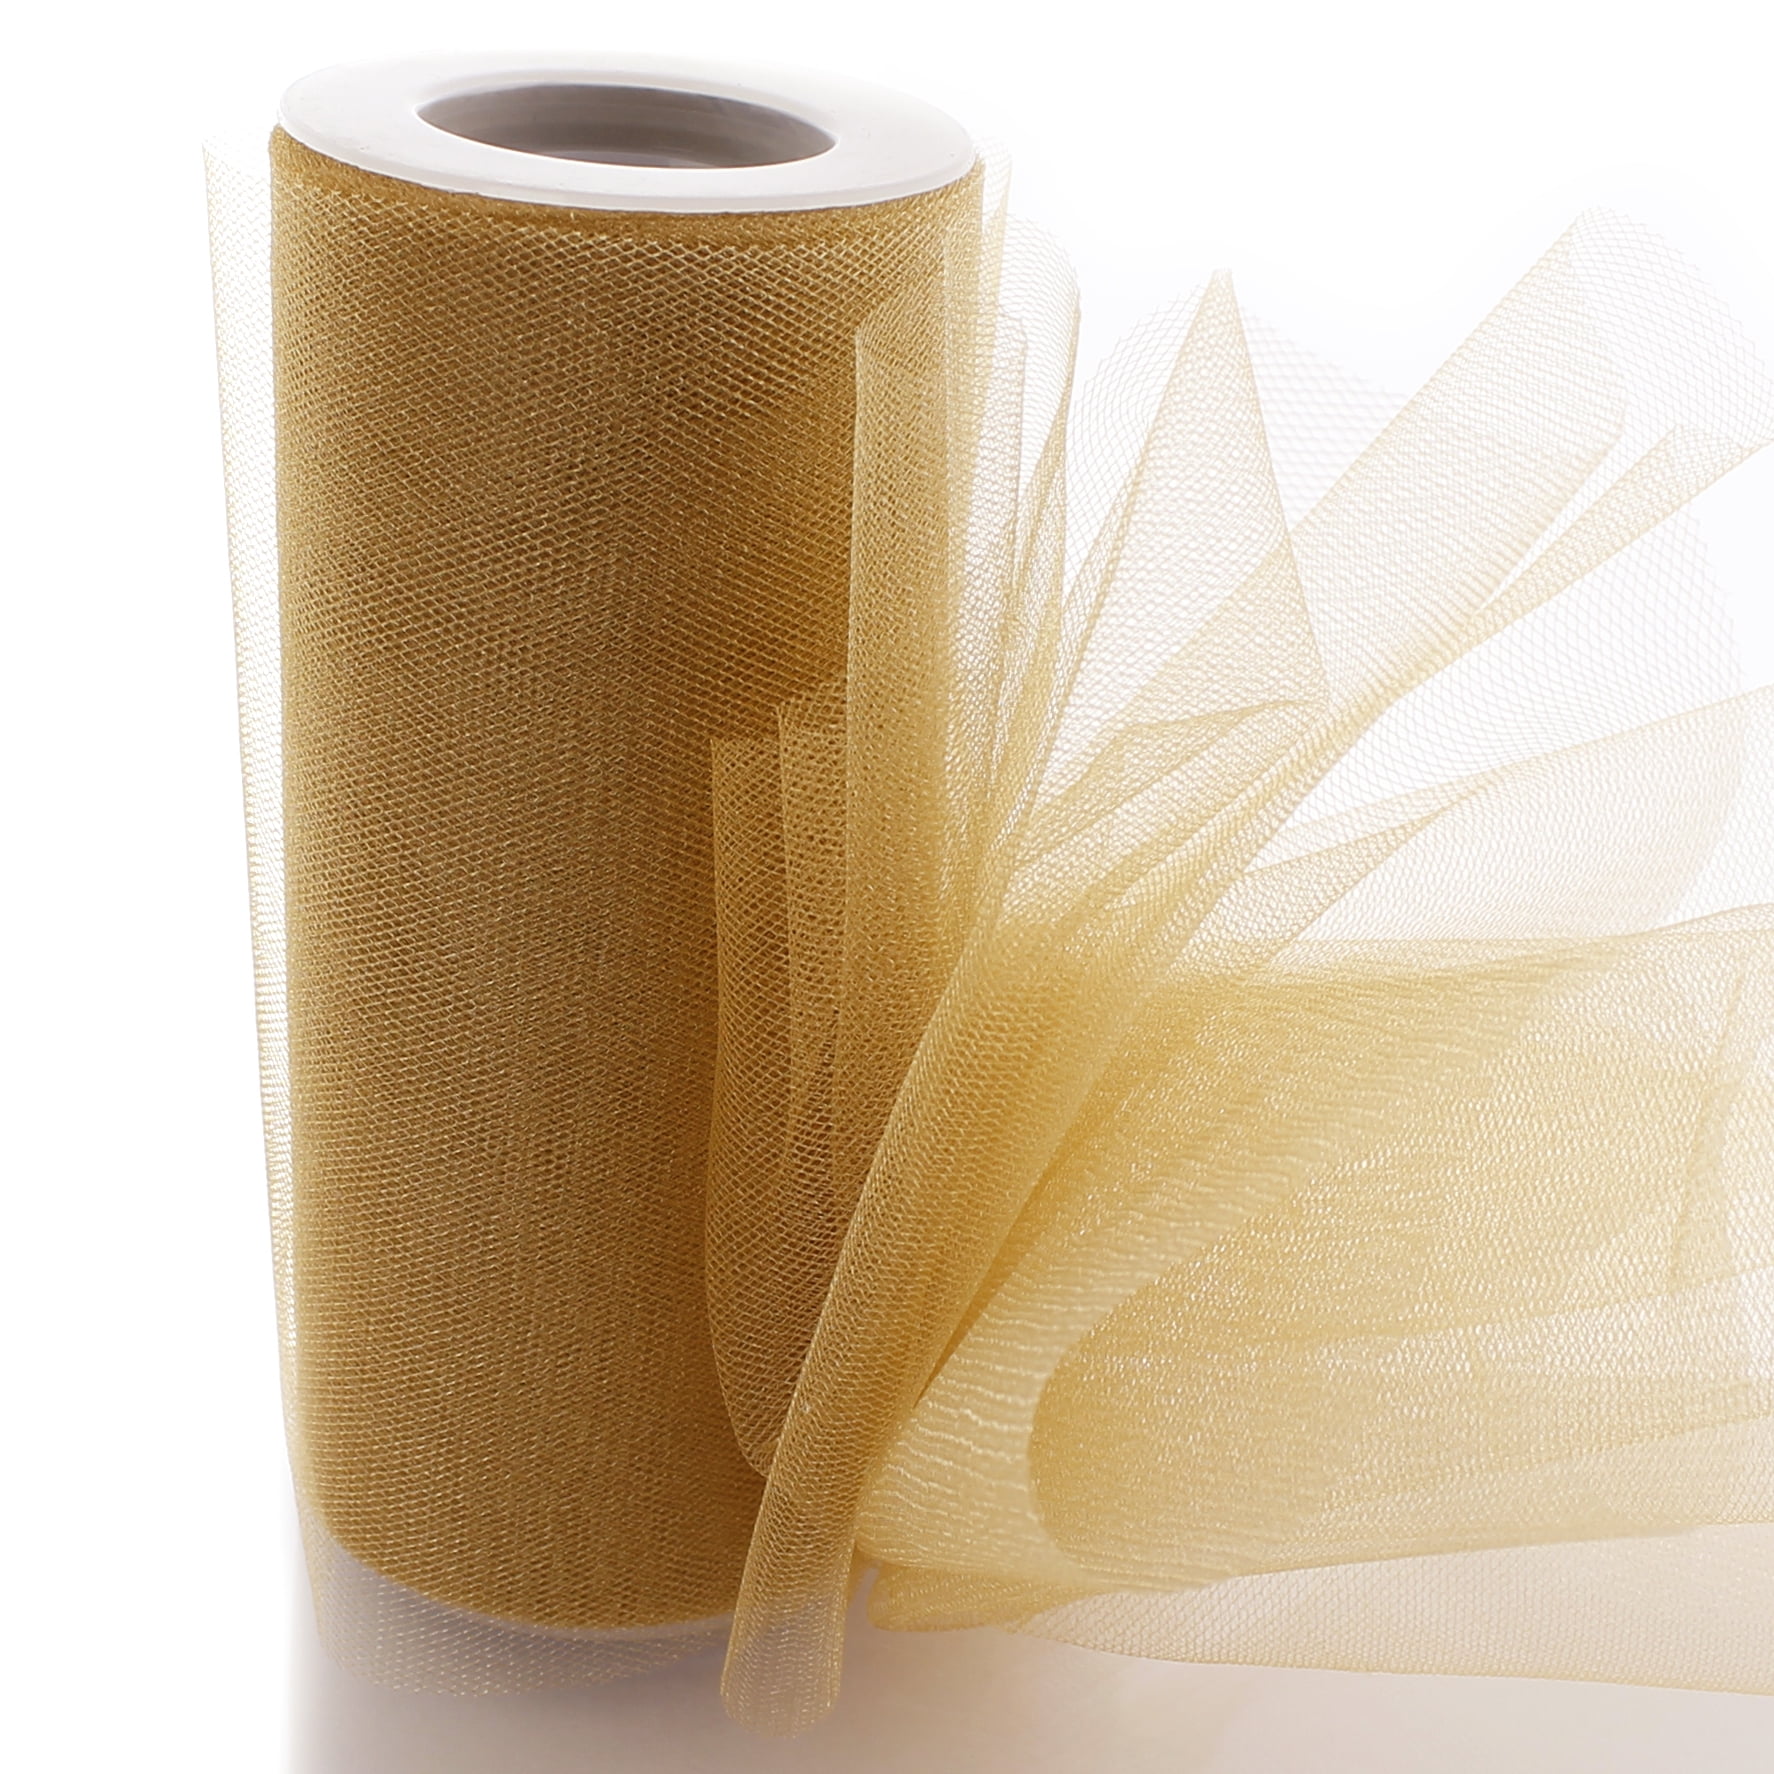 6 Shimmer Tulle Fabric Roll For Crafts, Wedding, Pary Decorations, Gifts -  Gold 100 Yards